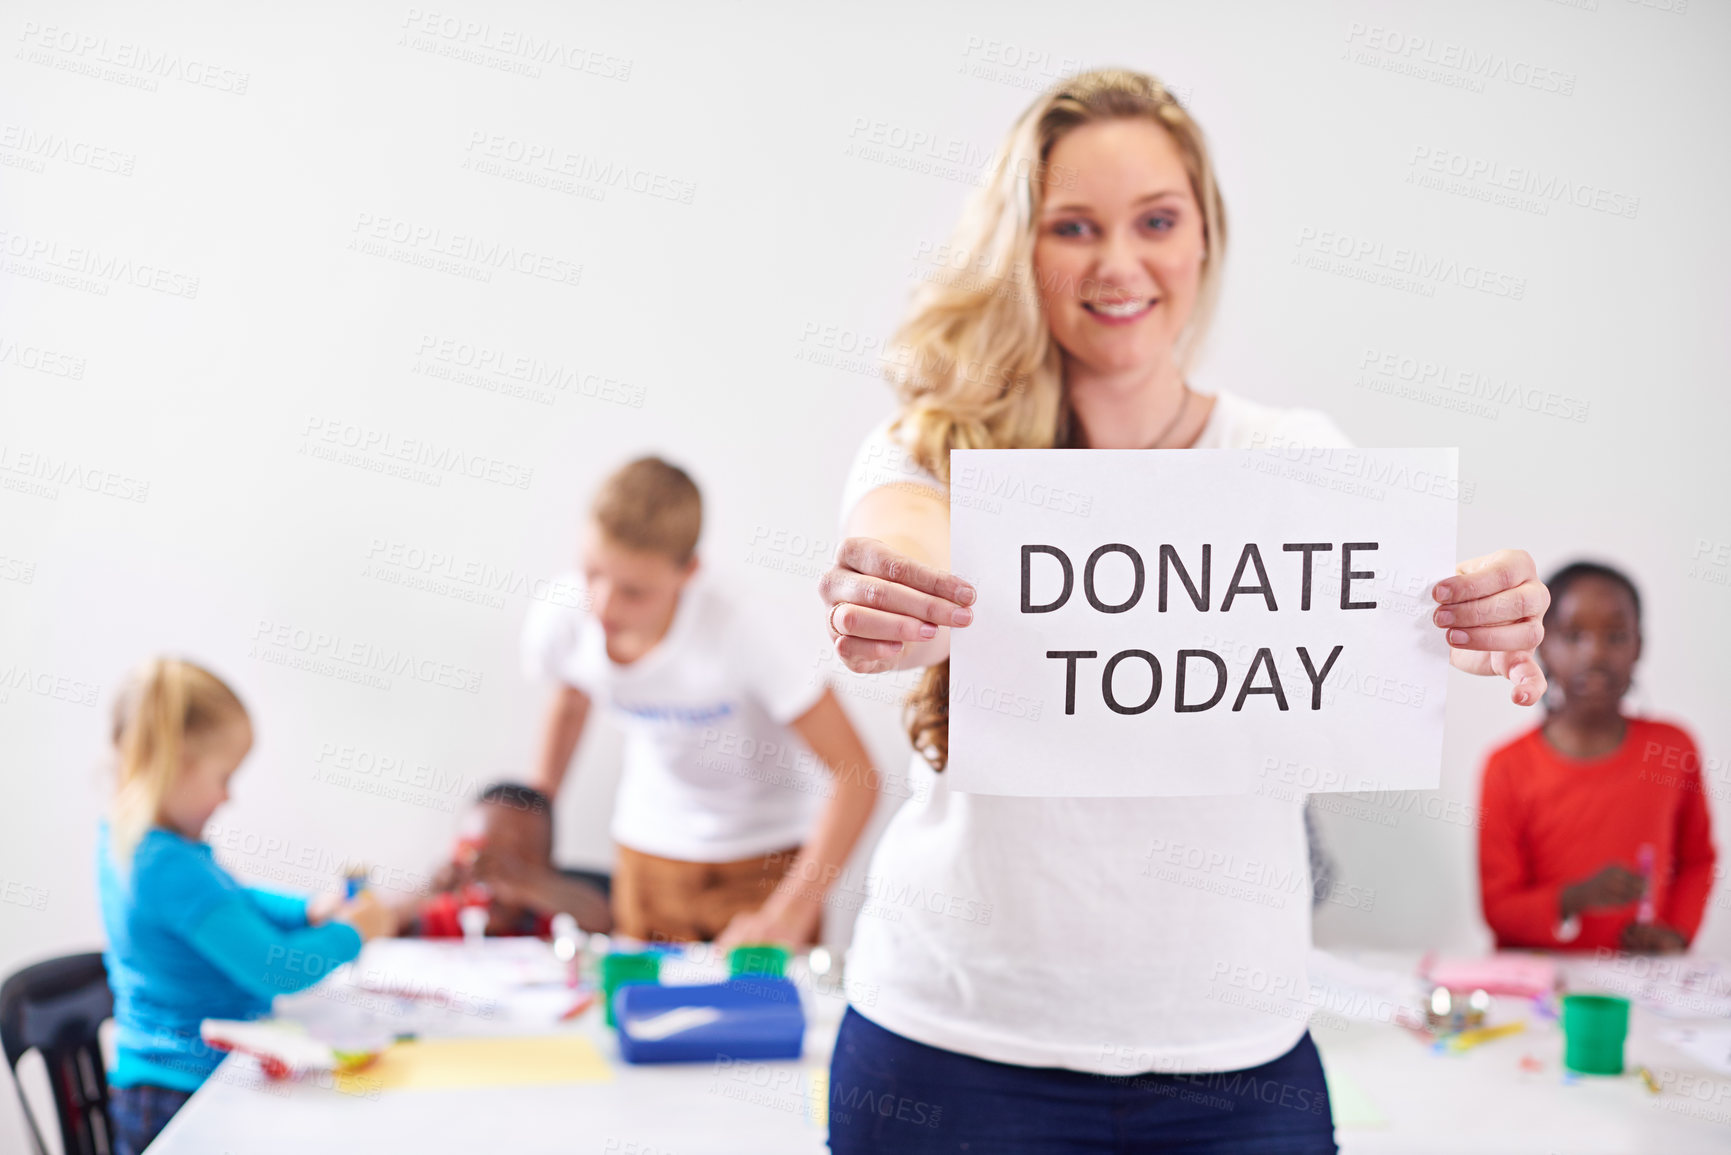 Buy stock photo Portrait of a volunteer holding up a 'donate today' sign while working with little children